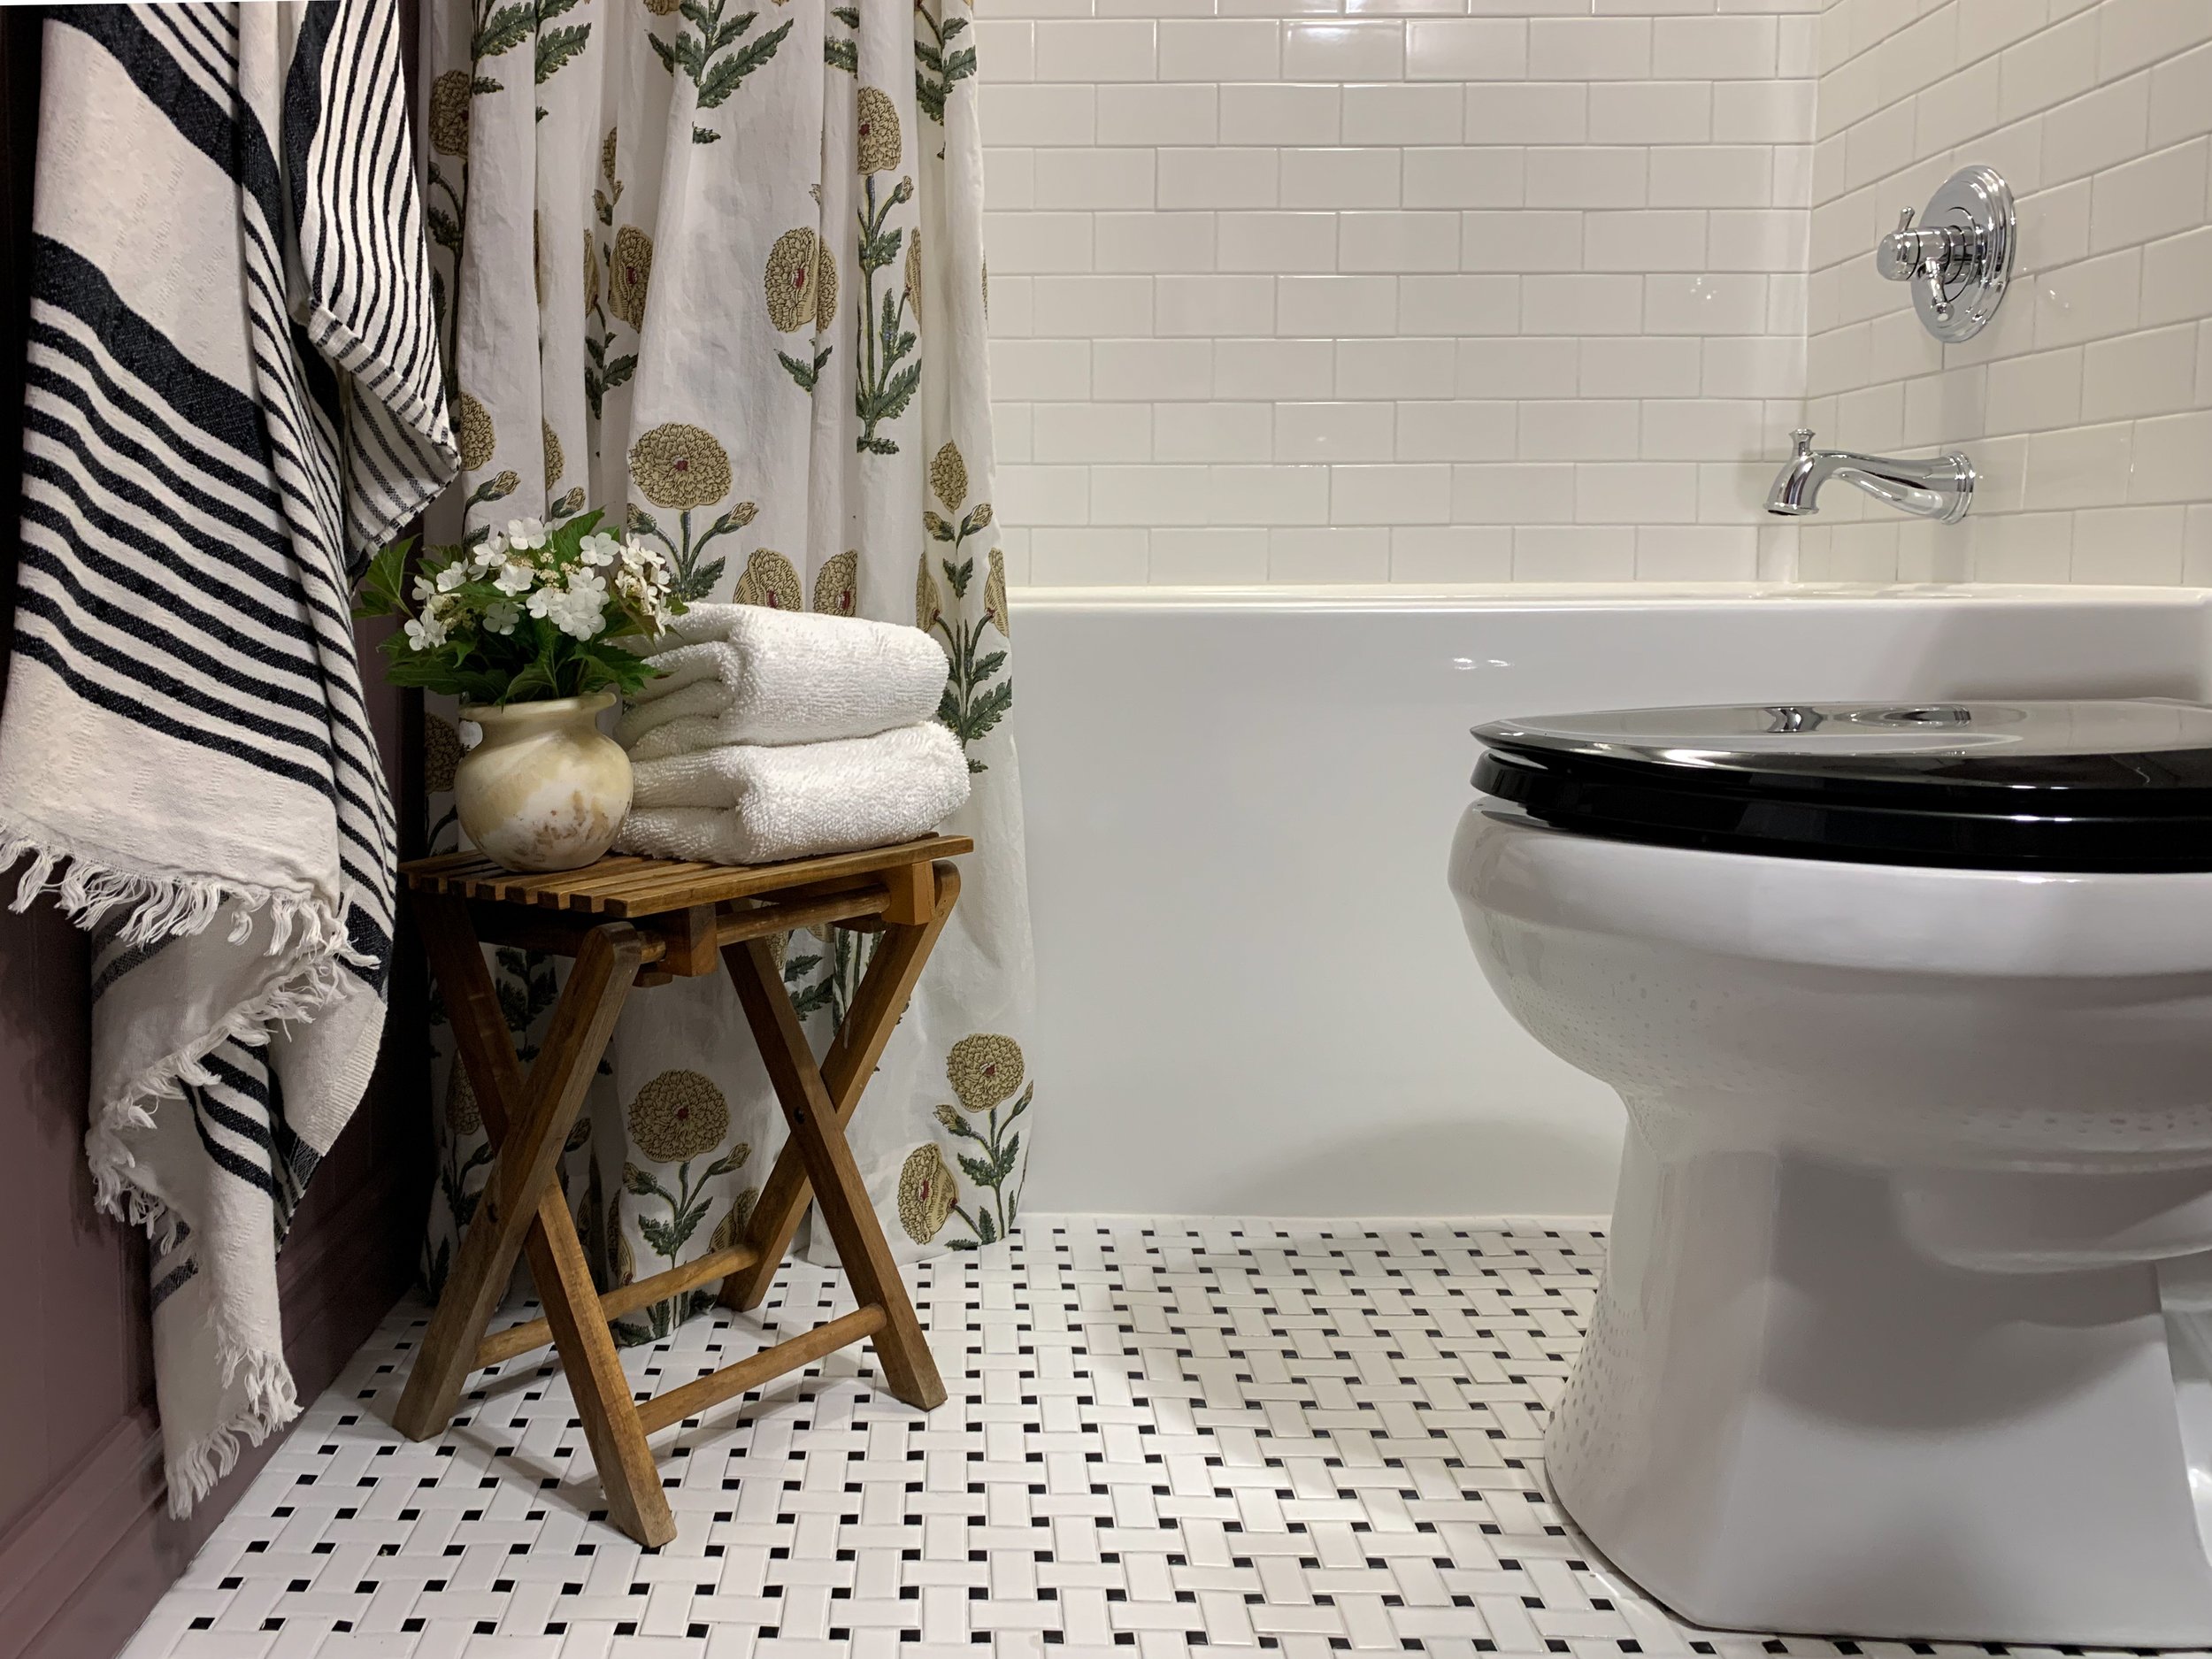 bathroom showing black toilet seat, black and white basketweave floor, white subway tile, purple beadboard, floral shower curtain, vintage stool with white towels and flowers